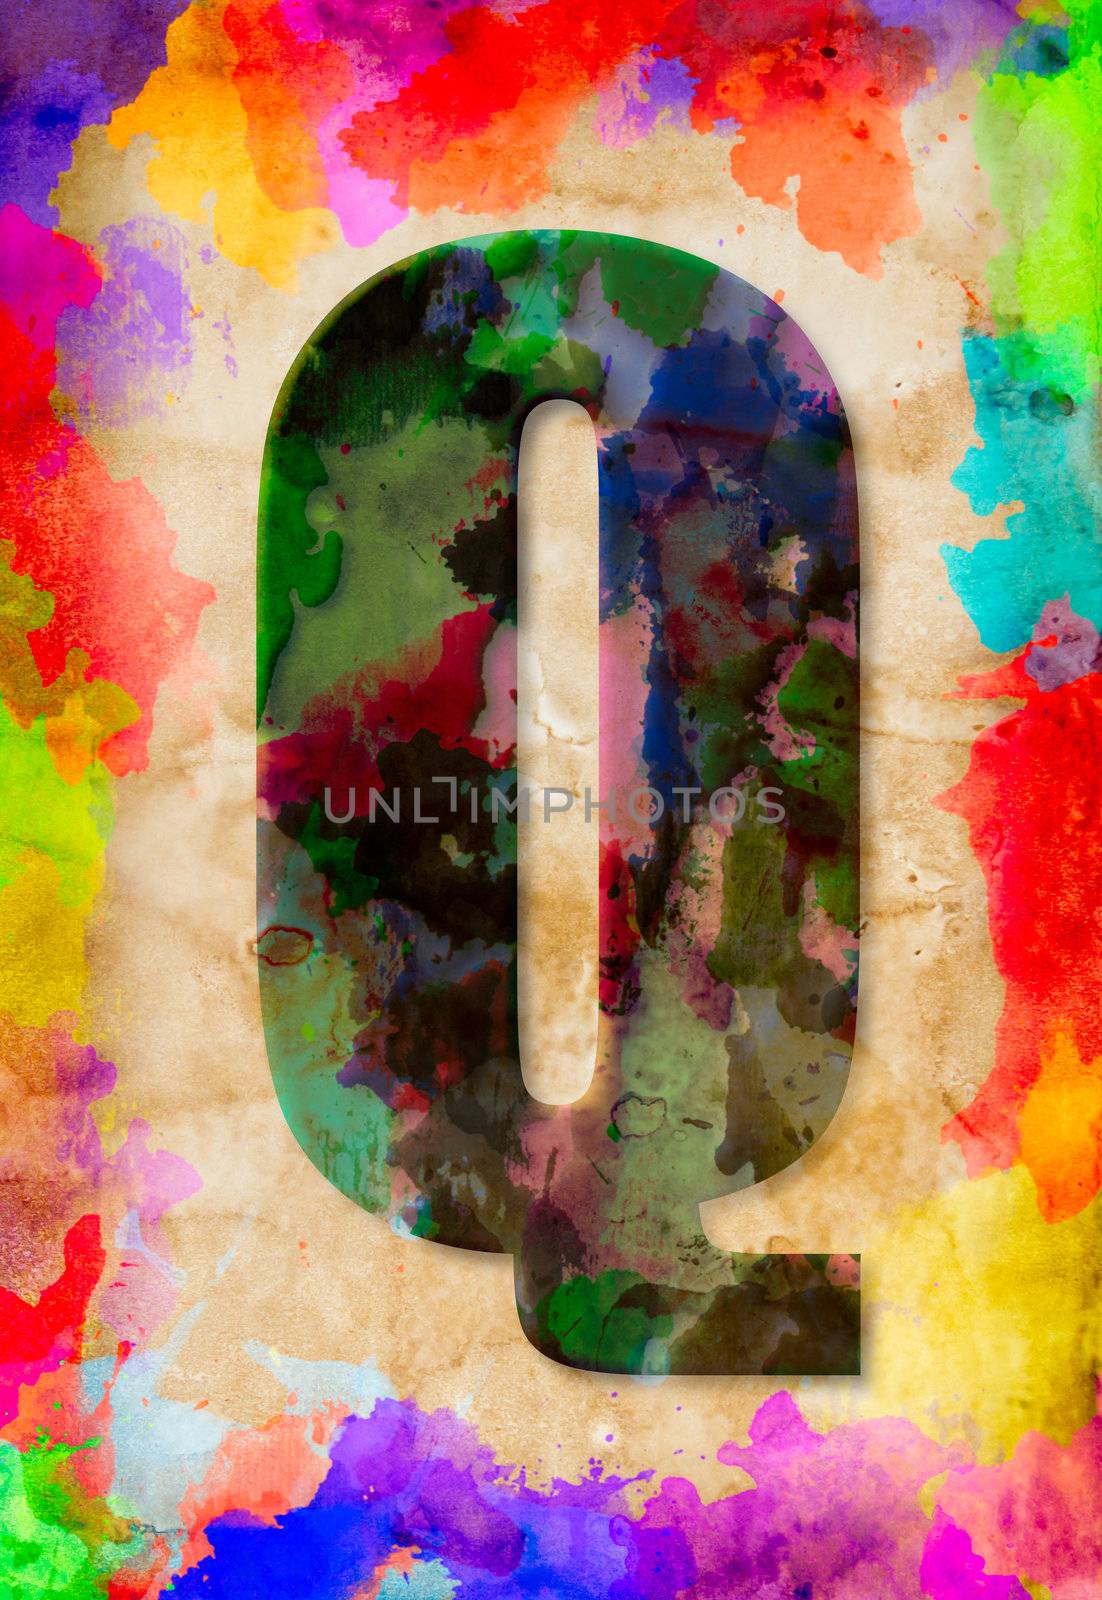 Letter Q watercolor on vintage paper by tungphoto